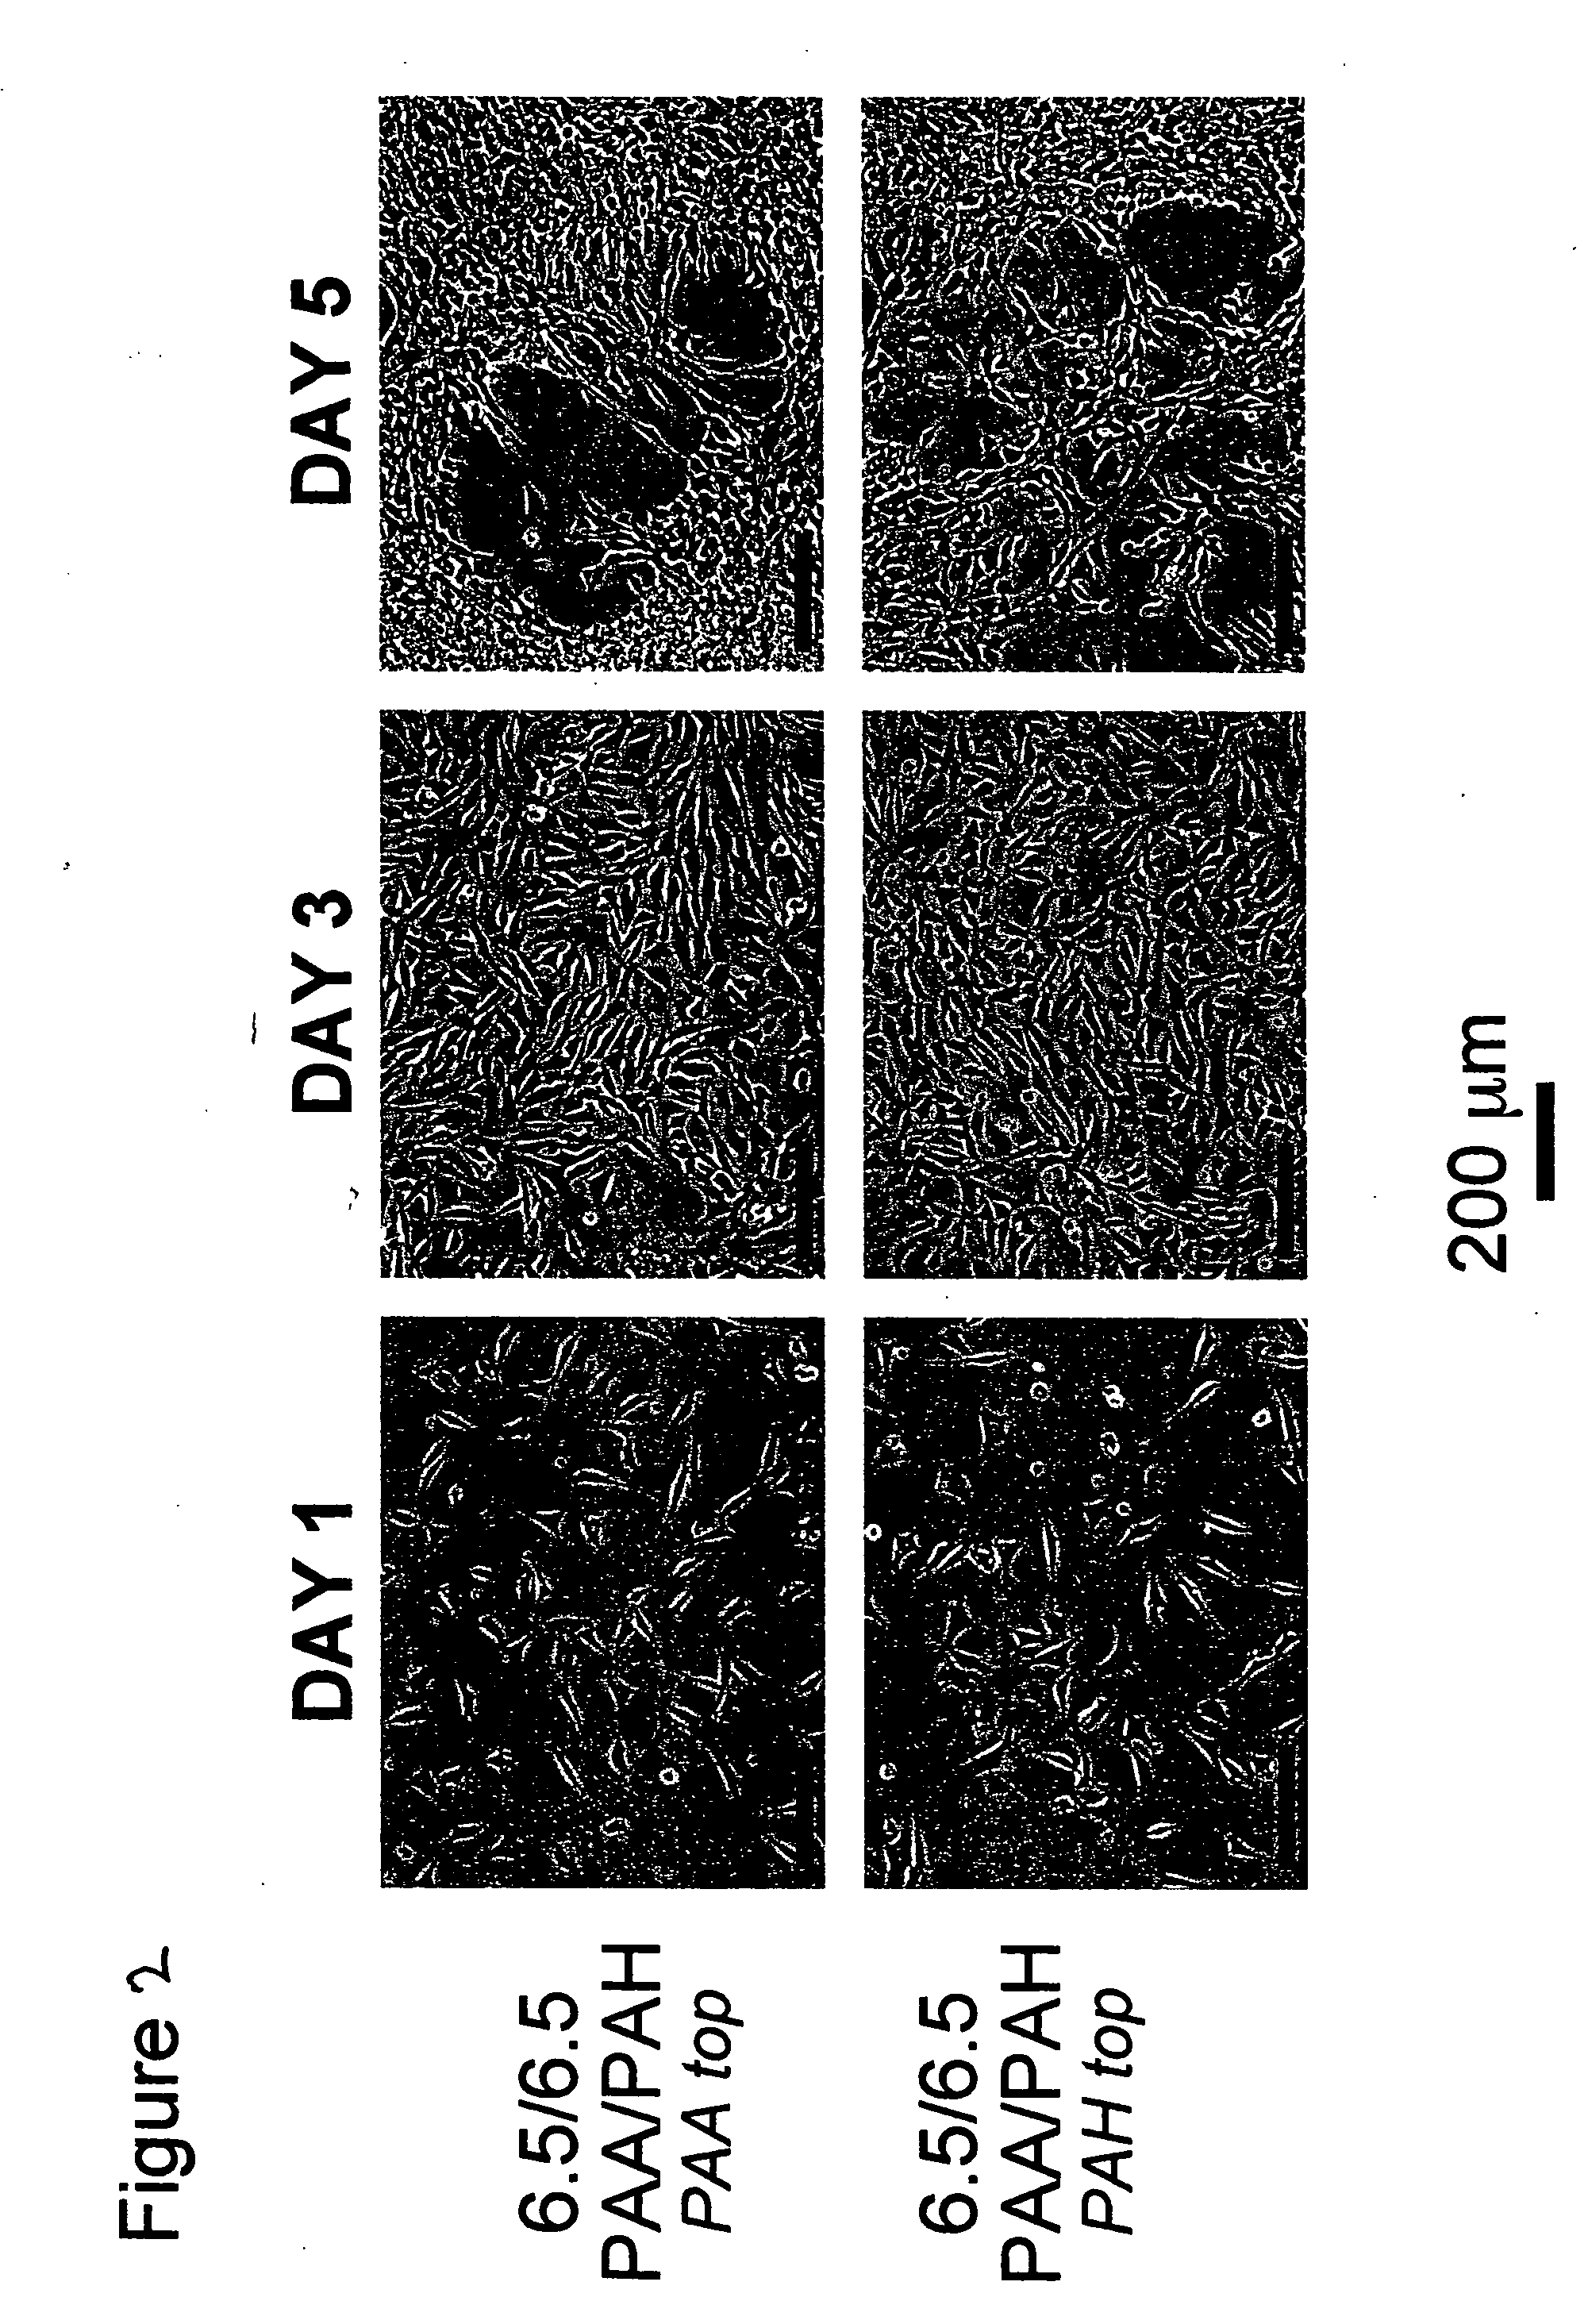 Polyelectrolyte multilayers that influence cell growth methods of applying them, and articles coated with them